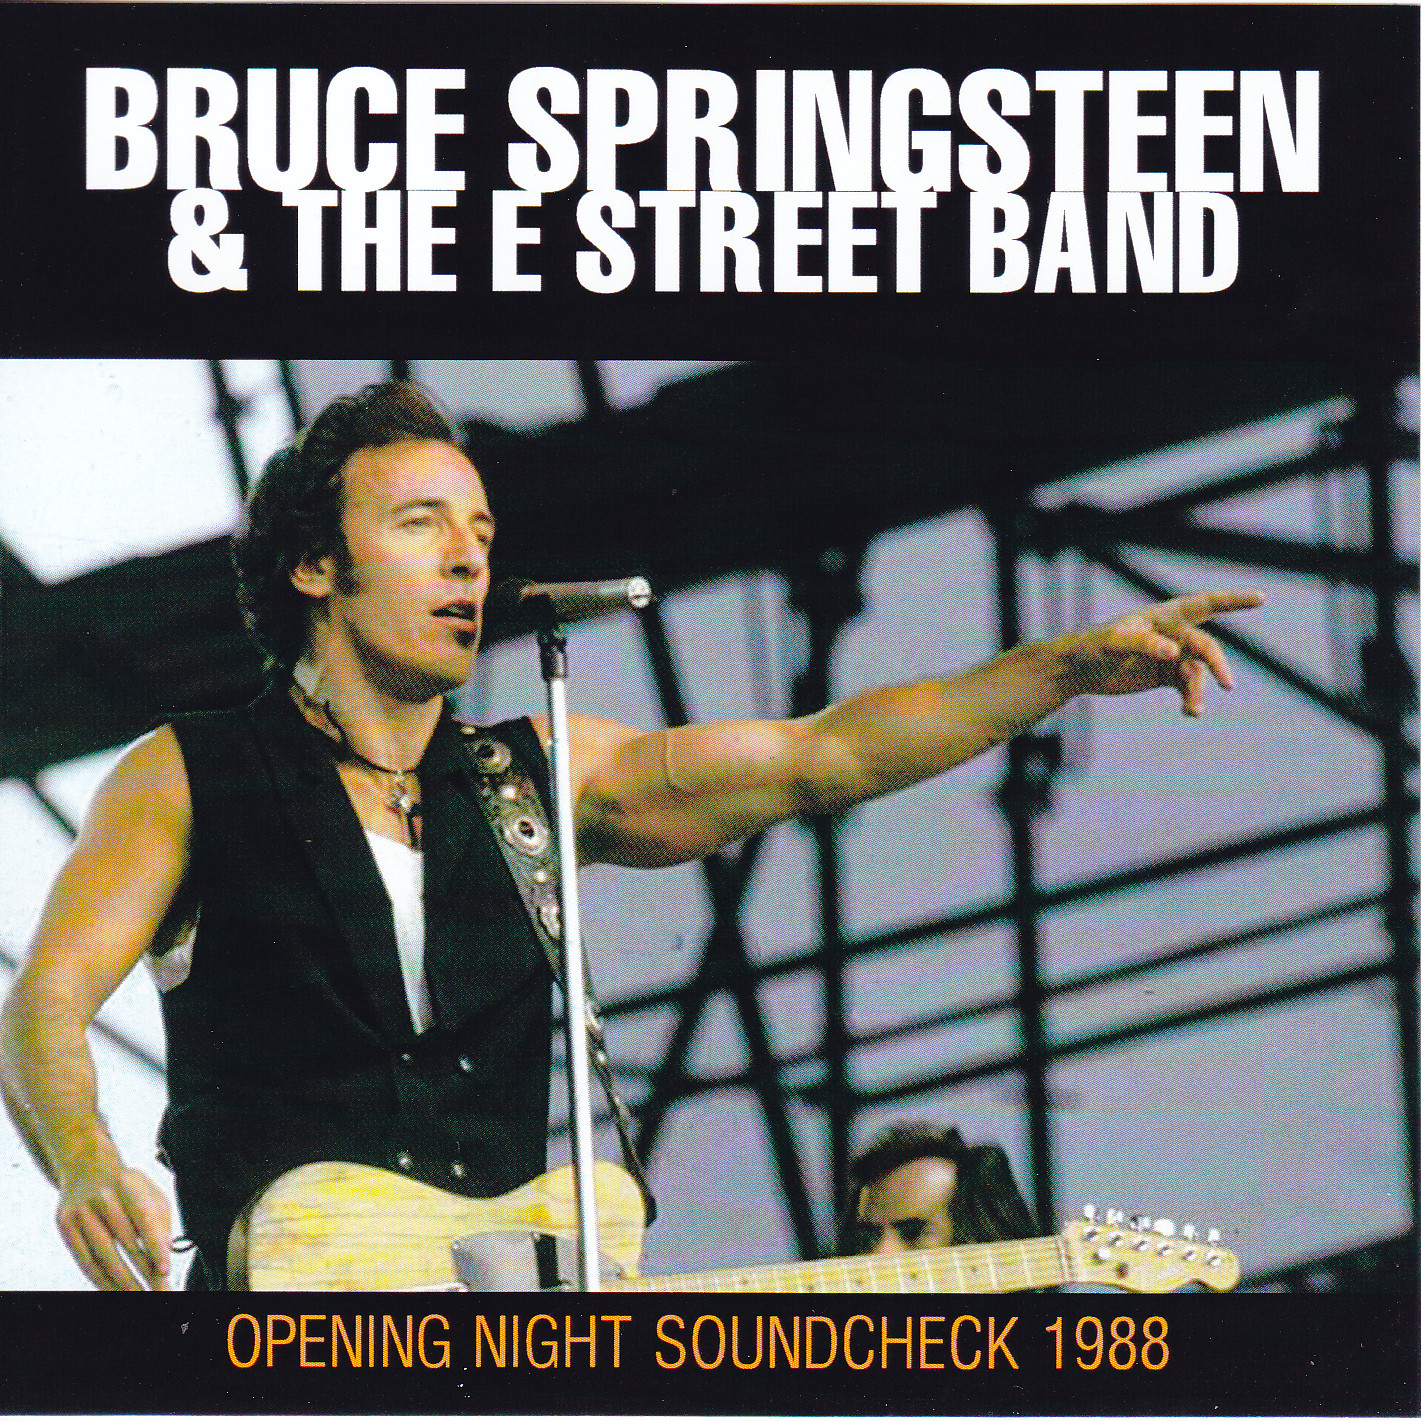 Bruce Springsteen & The E Street Band / Opening Night Soundcheck 1988